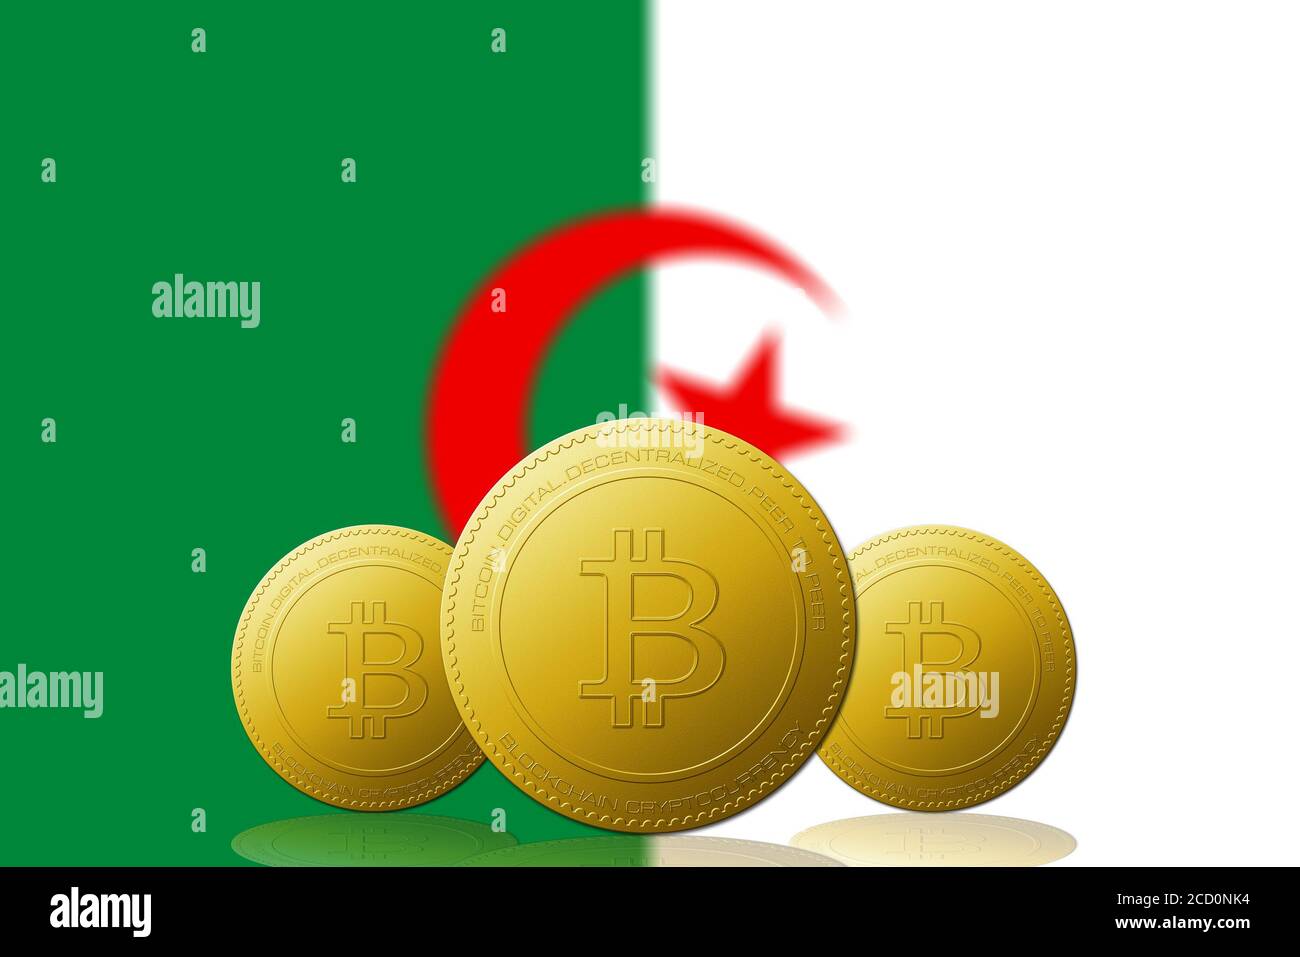 Three Bitcoins cryptocurrency with ALGERIA flag on background. Stock Photo